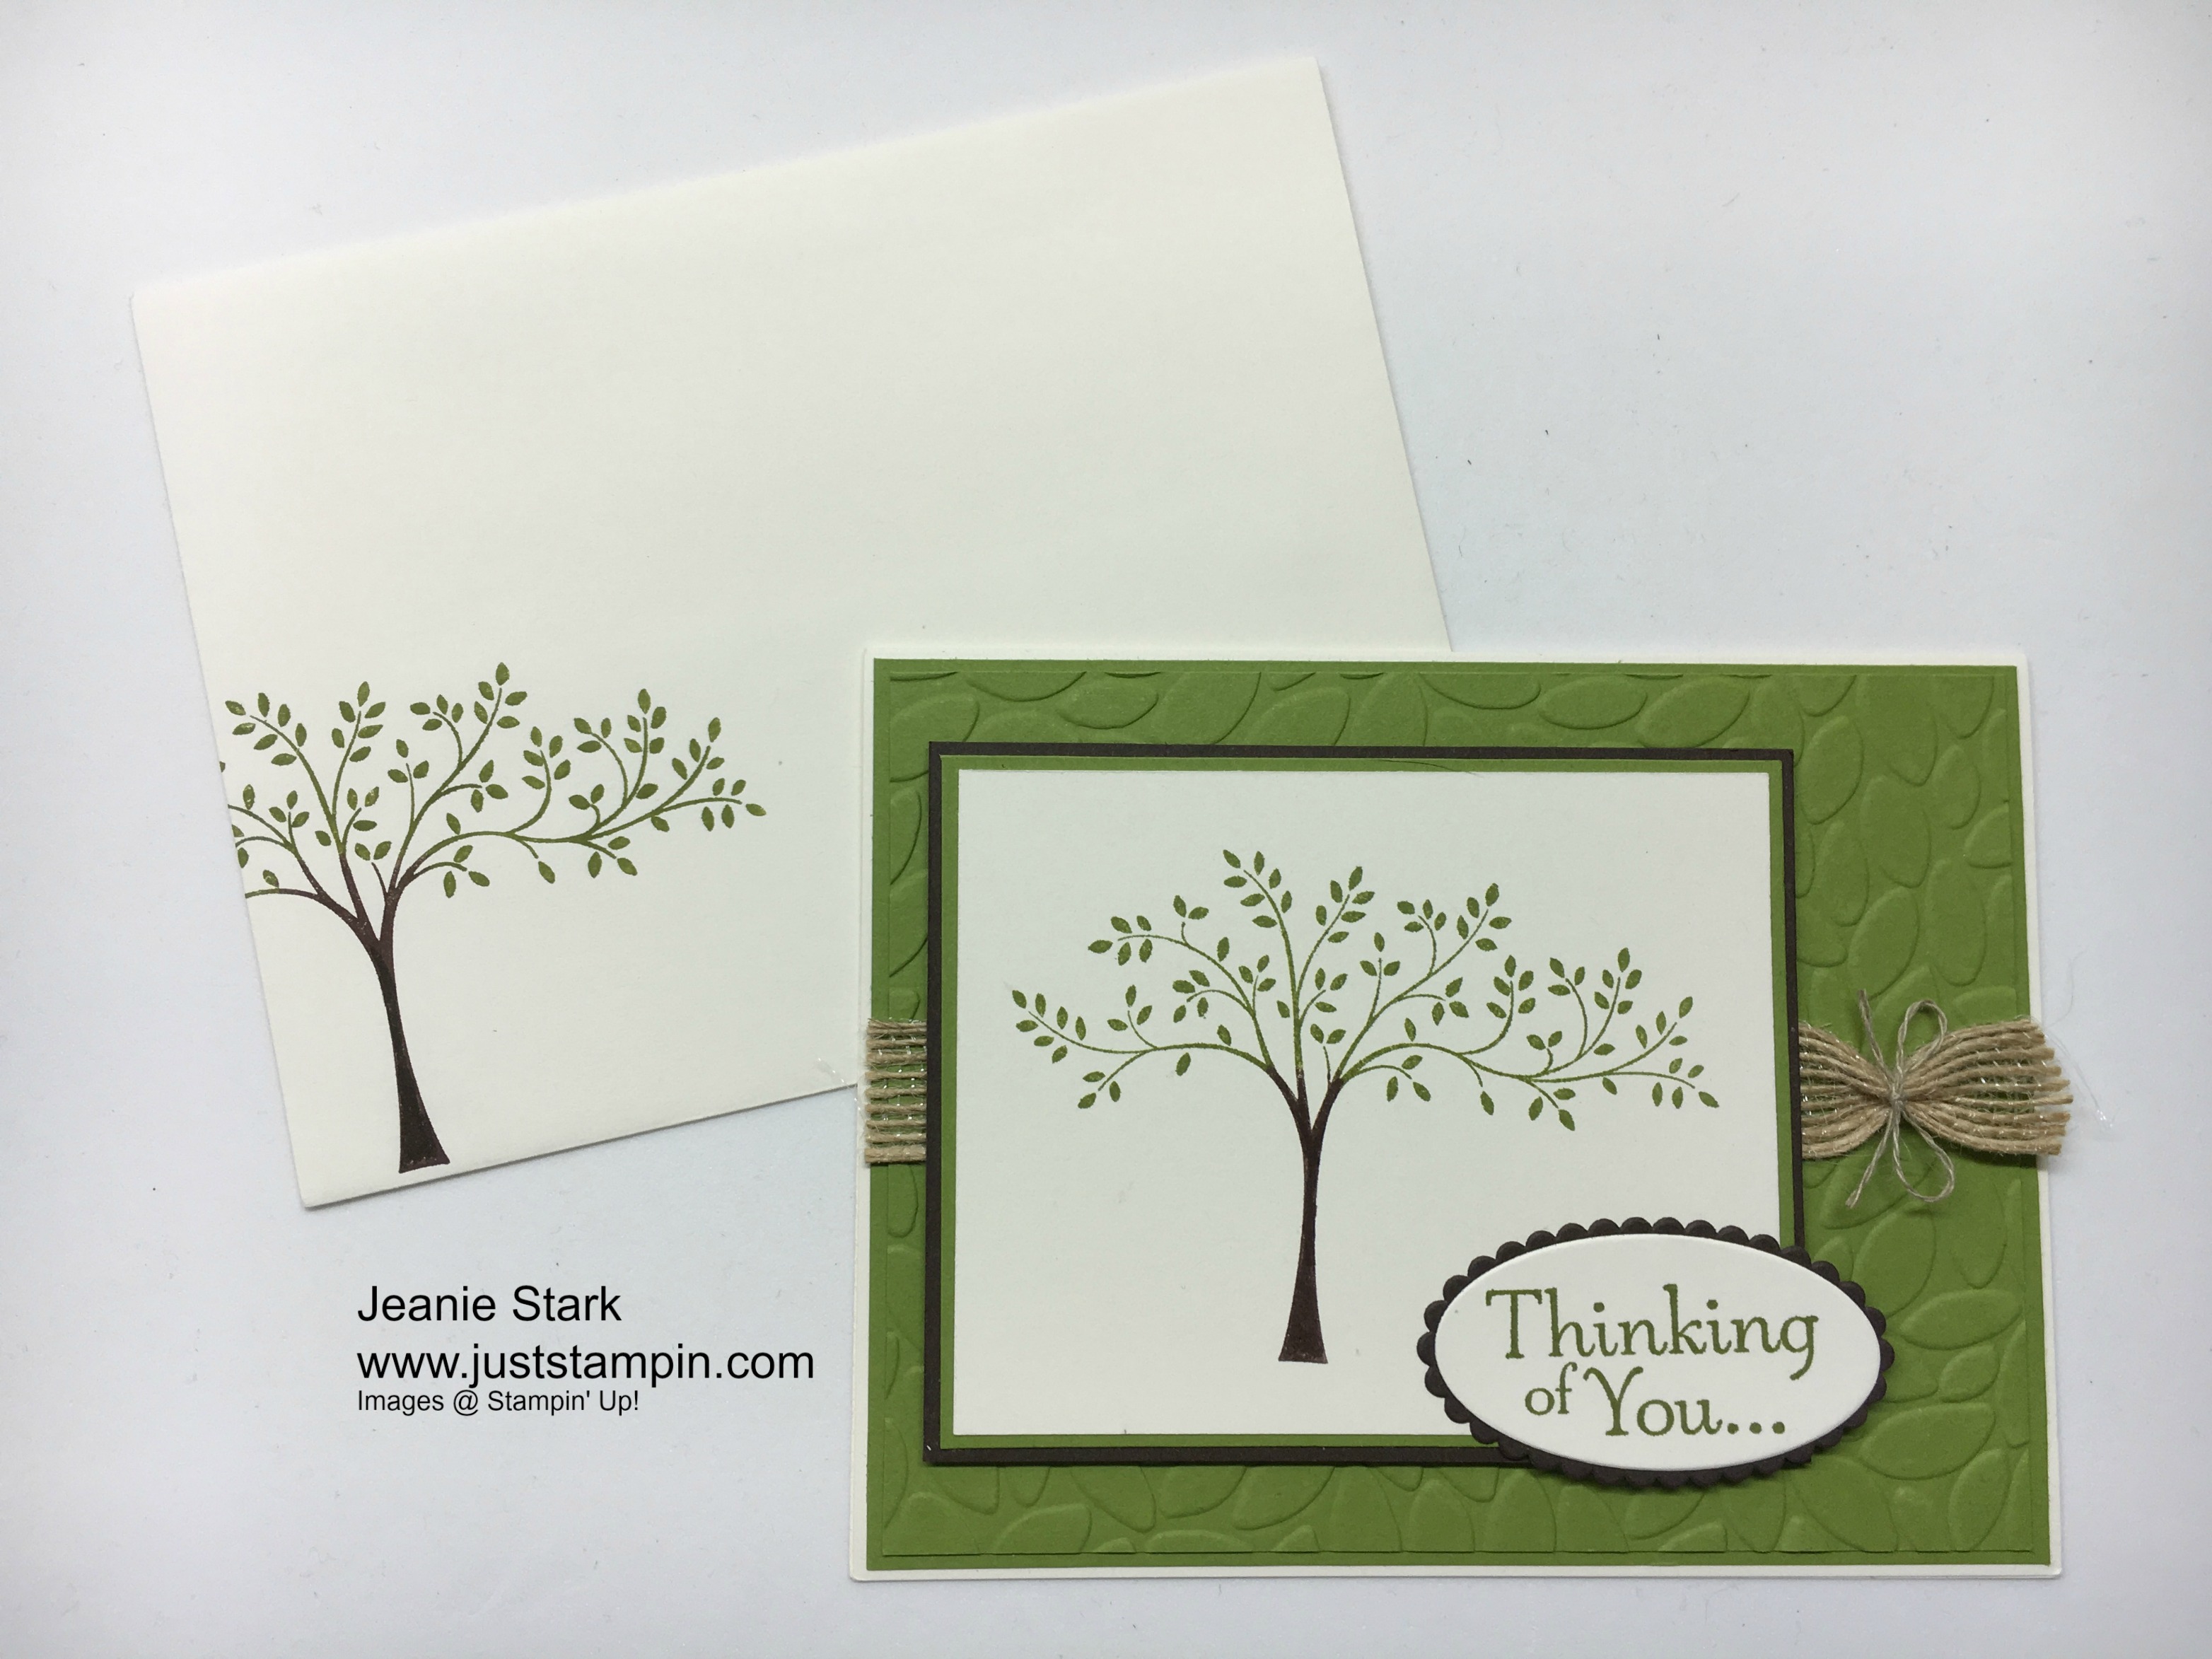 Stampin Up Thoughts & Prayers Thinking of You card idea - Jeanie Stark StampinUp